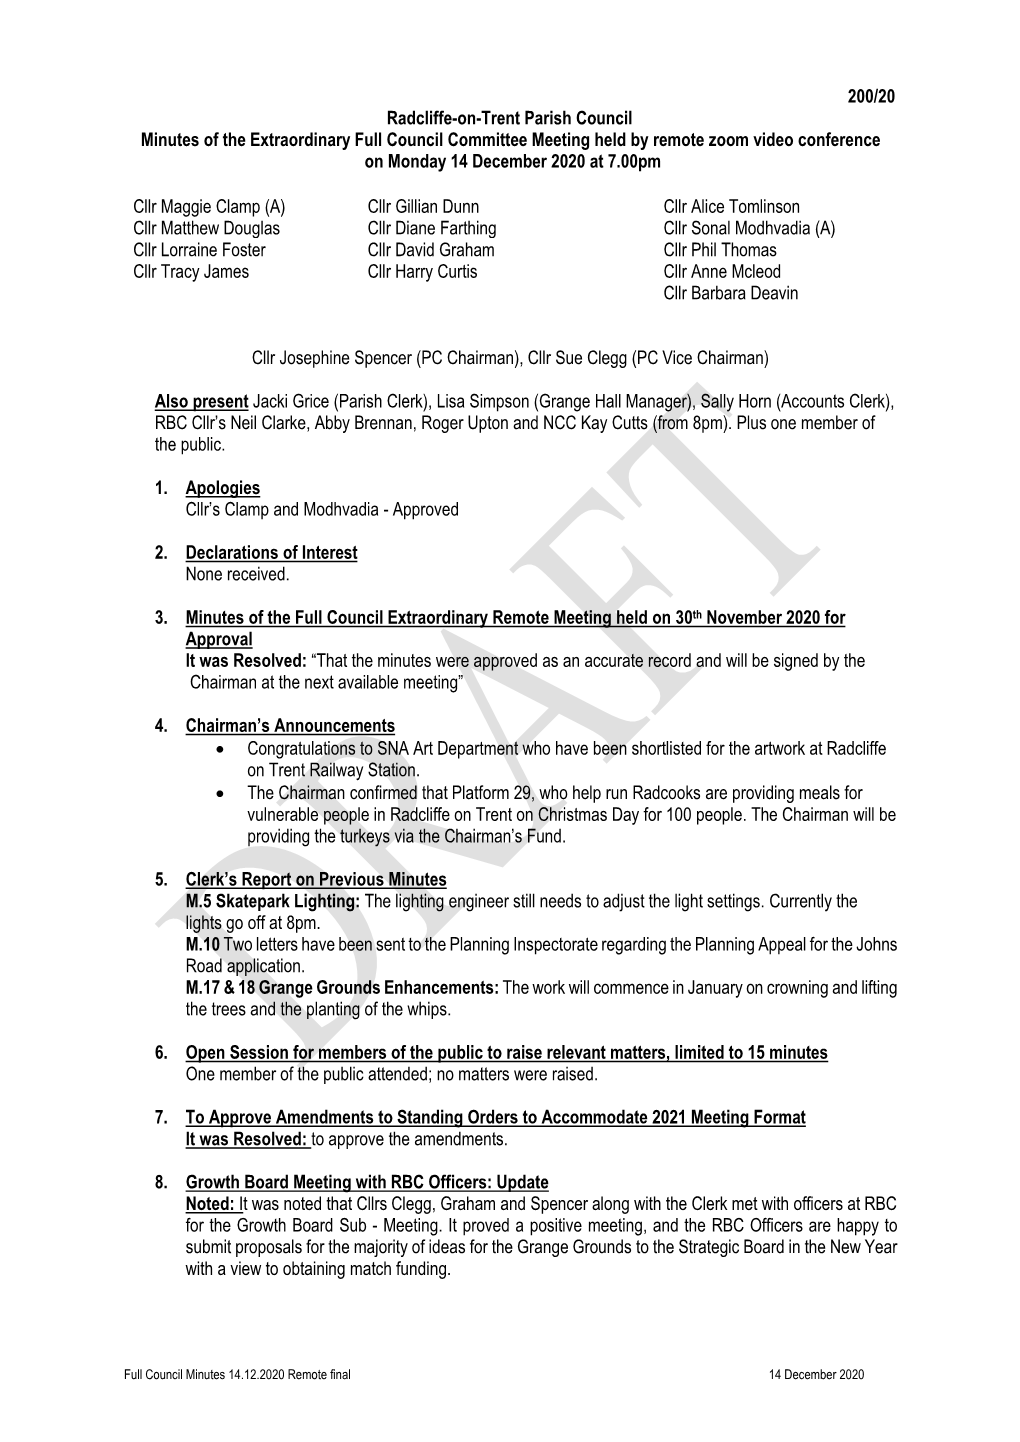 200/20 Radcliffe-On-Trent Parish Council Minutes of The